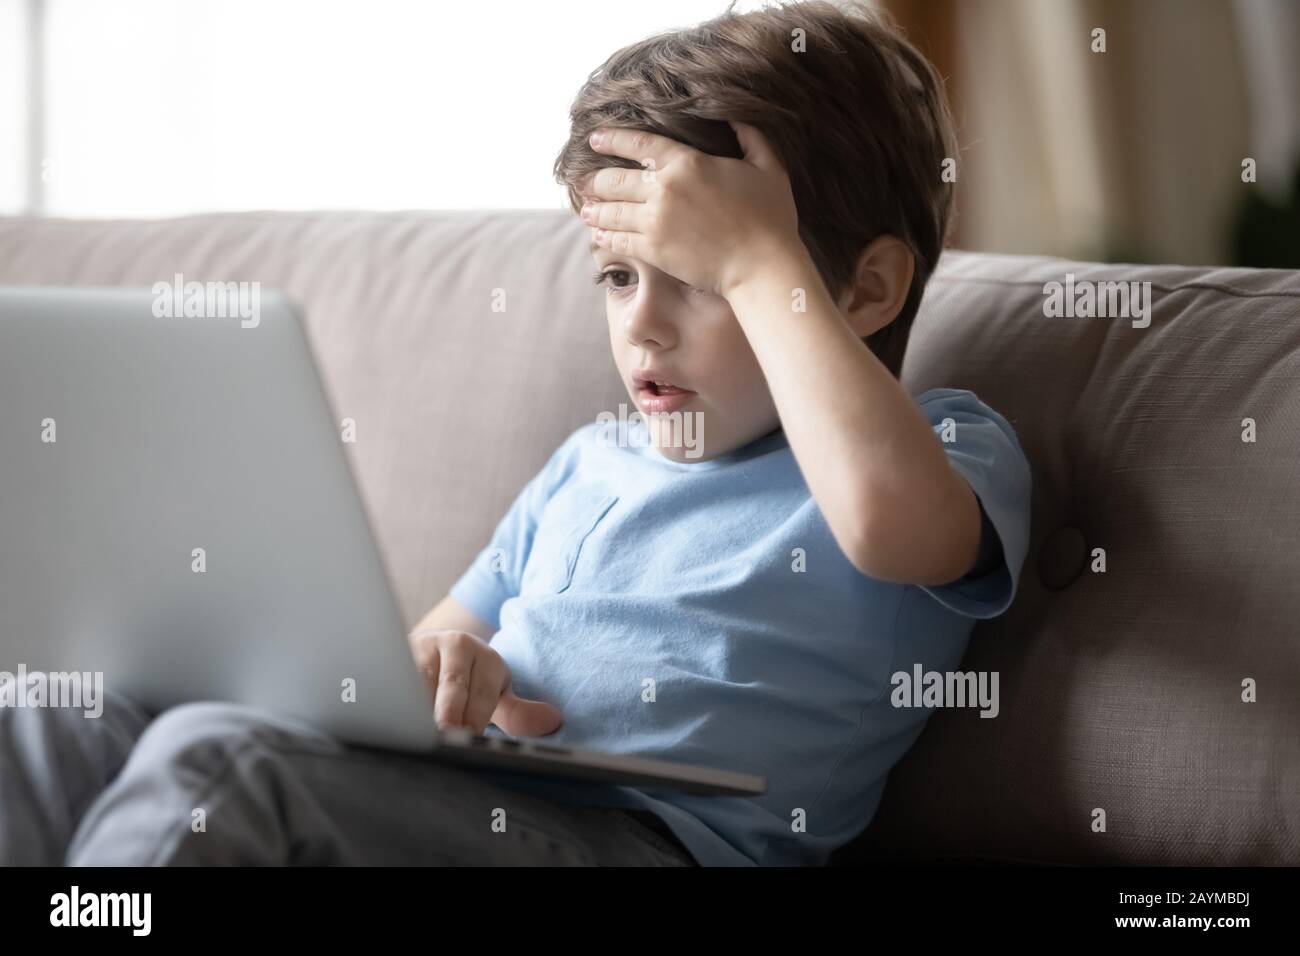 Little boy hocked by inappropriate content, looking at computer screen. Stock Photo